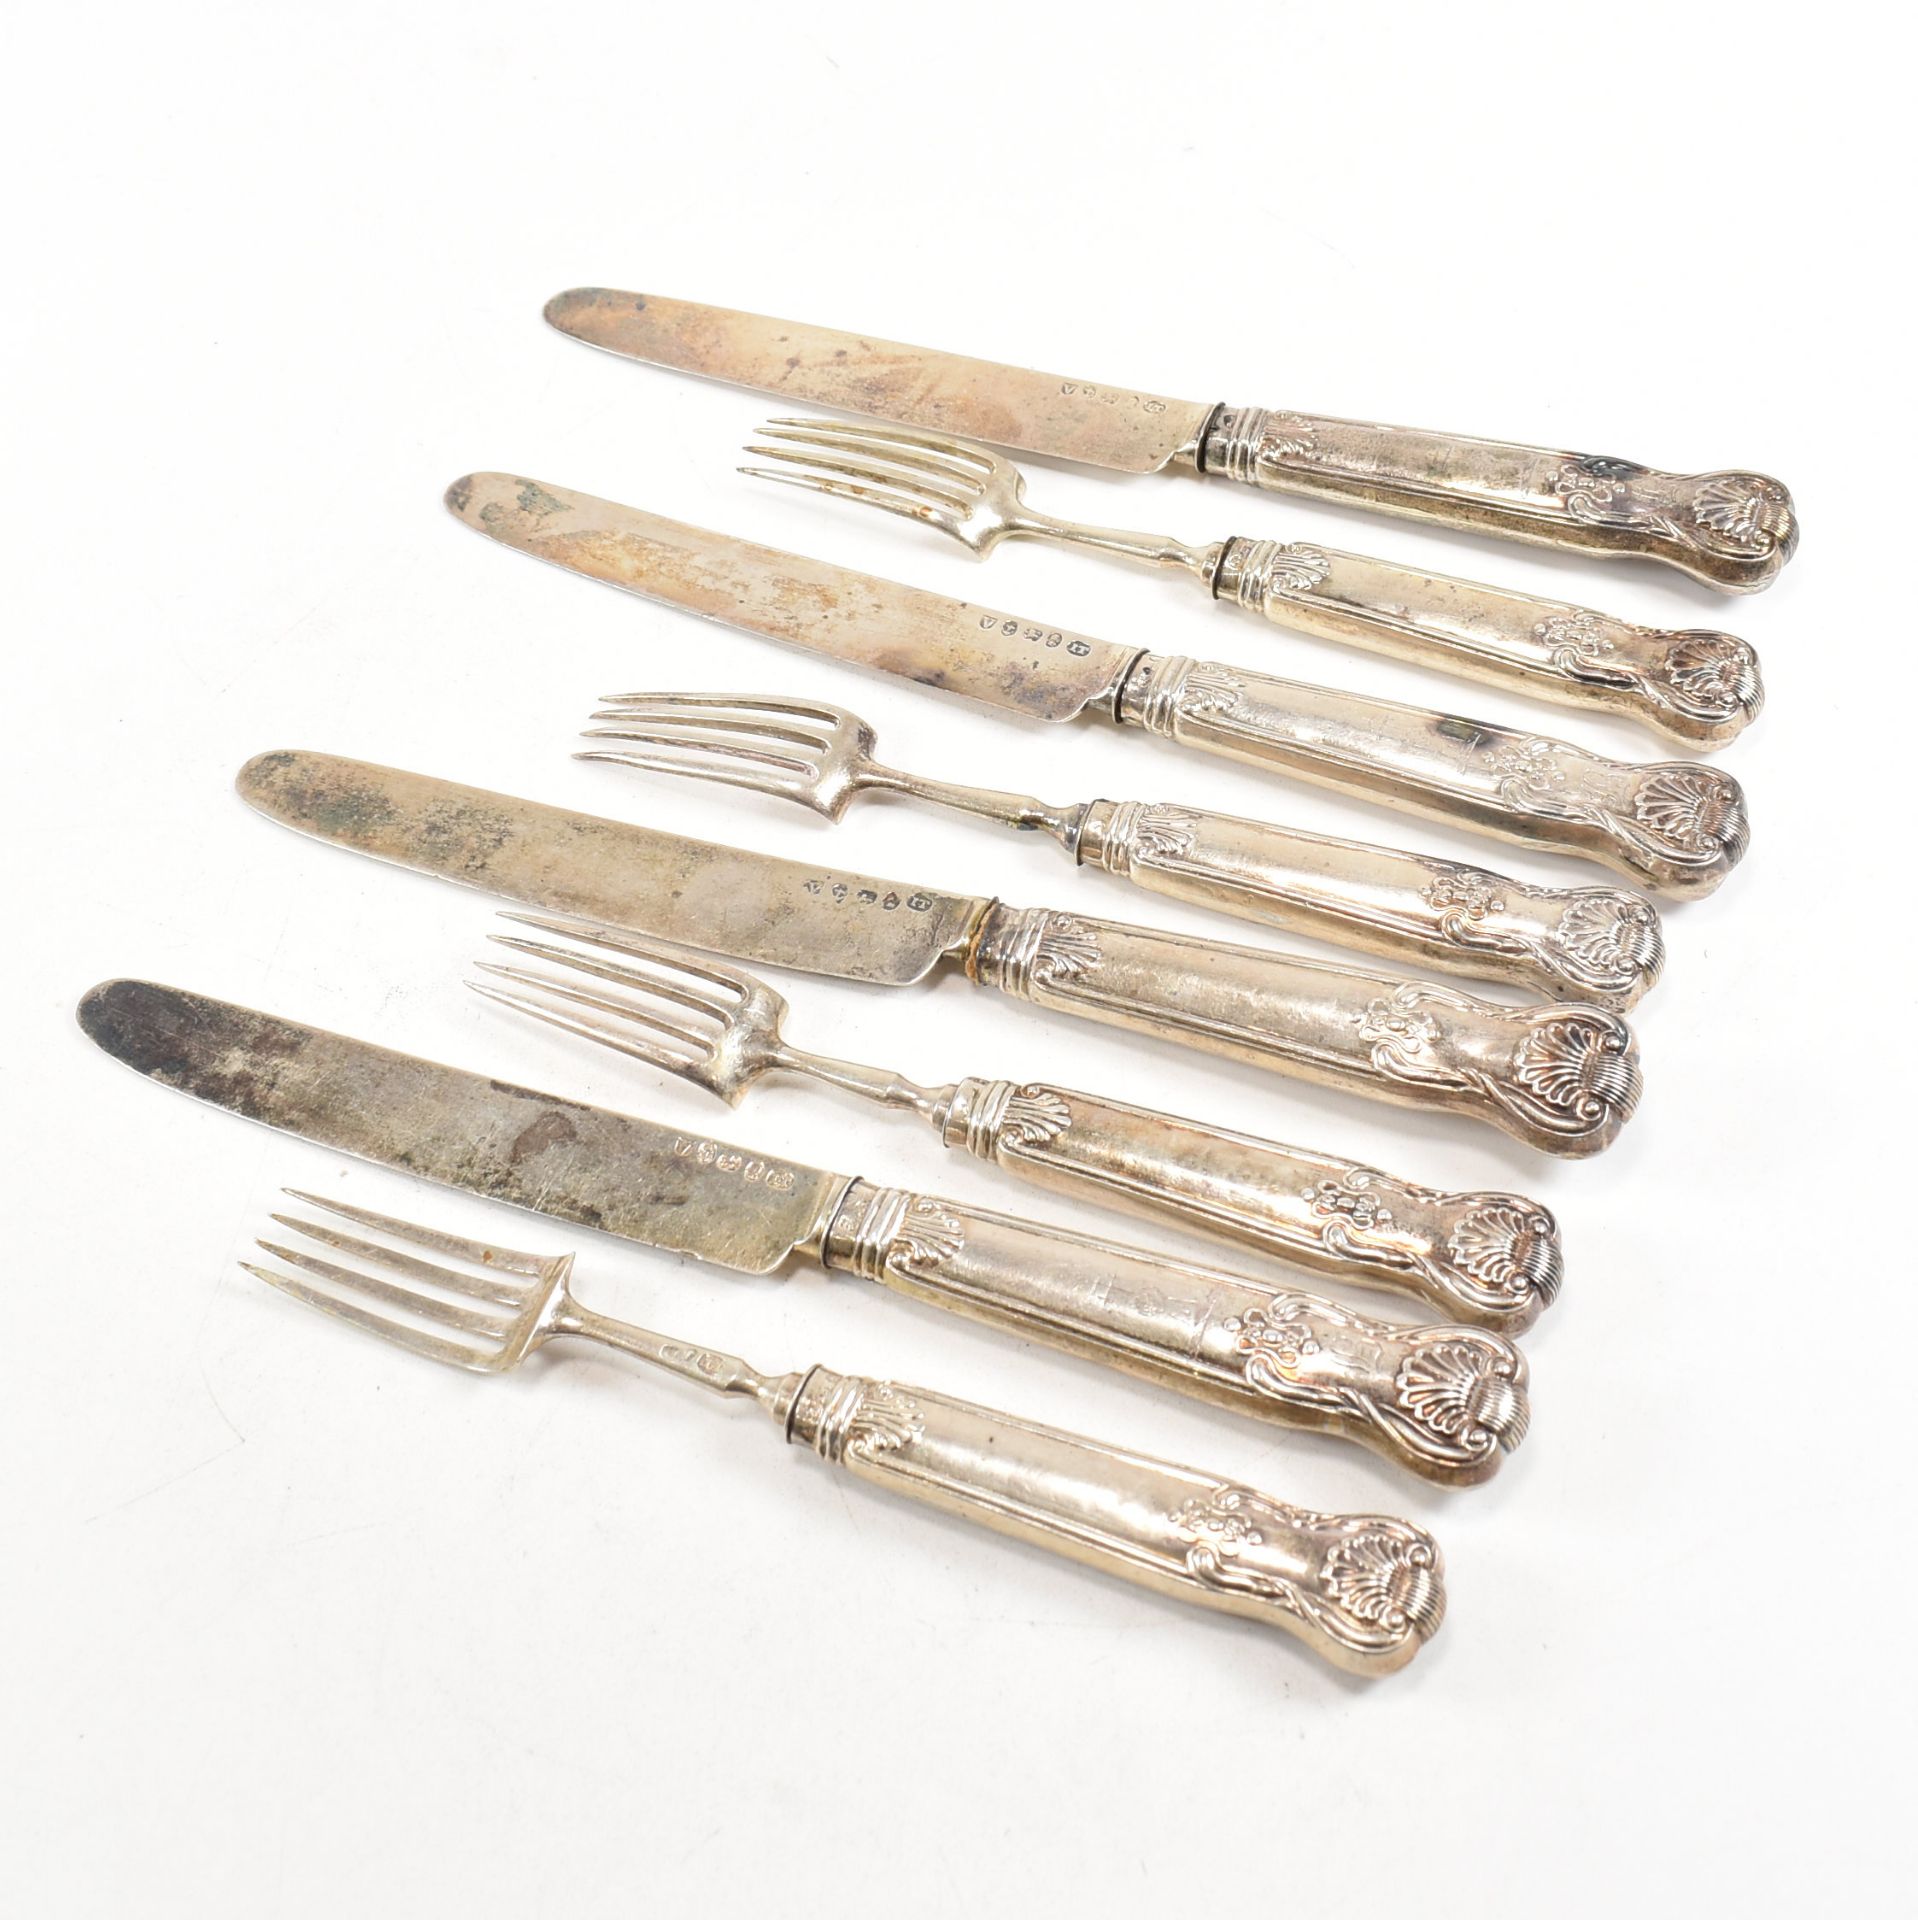 EARLY 19th CENTURY HALLMARKED SILVER 4 PIECE FLATWARE SET - Image 3 of 7